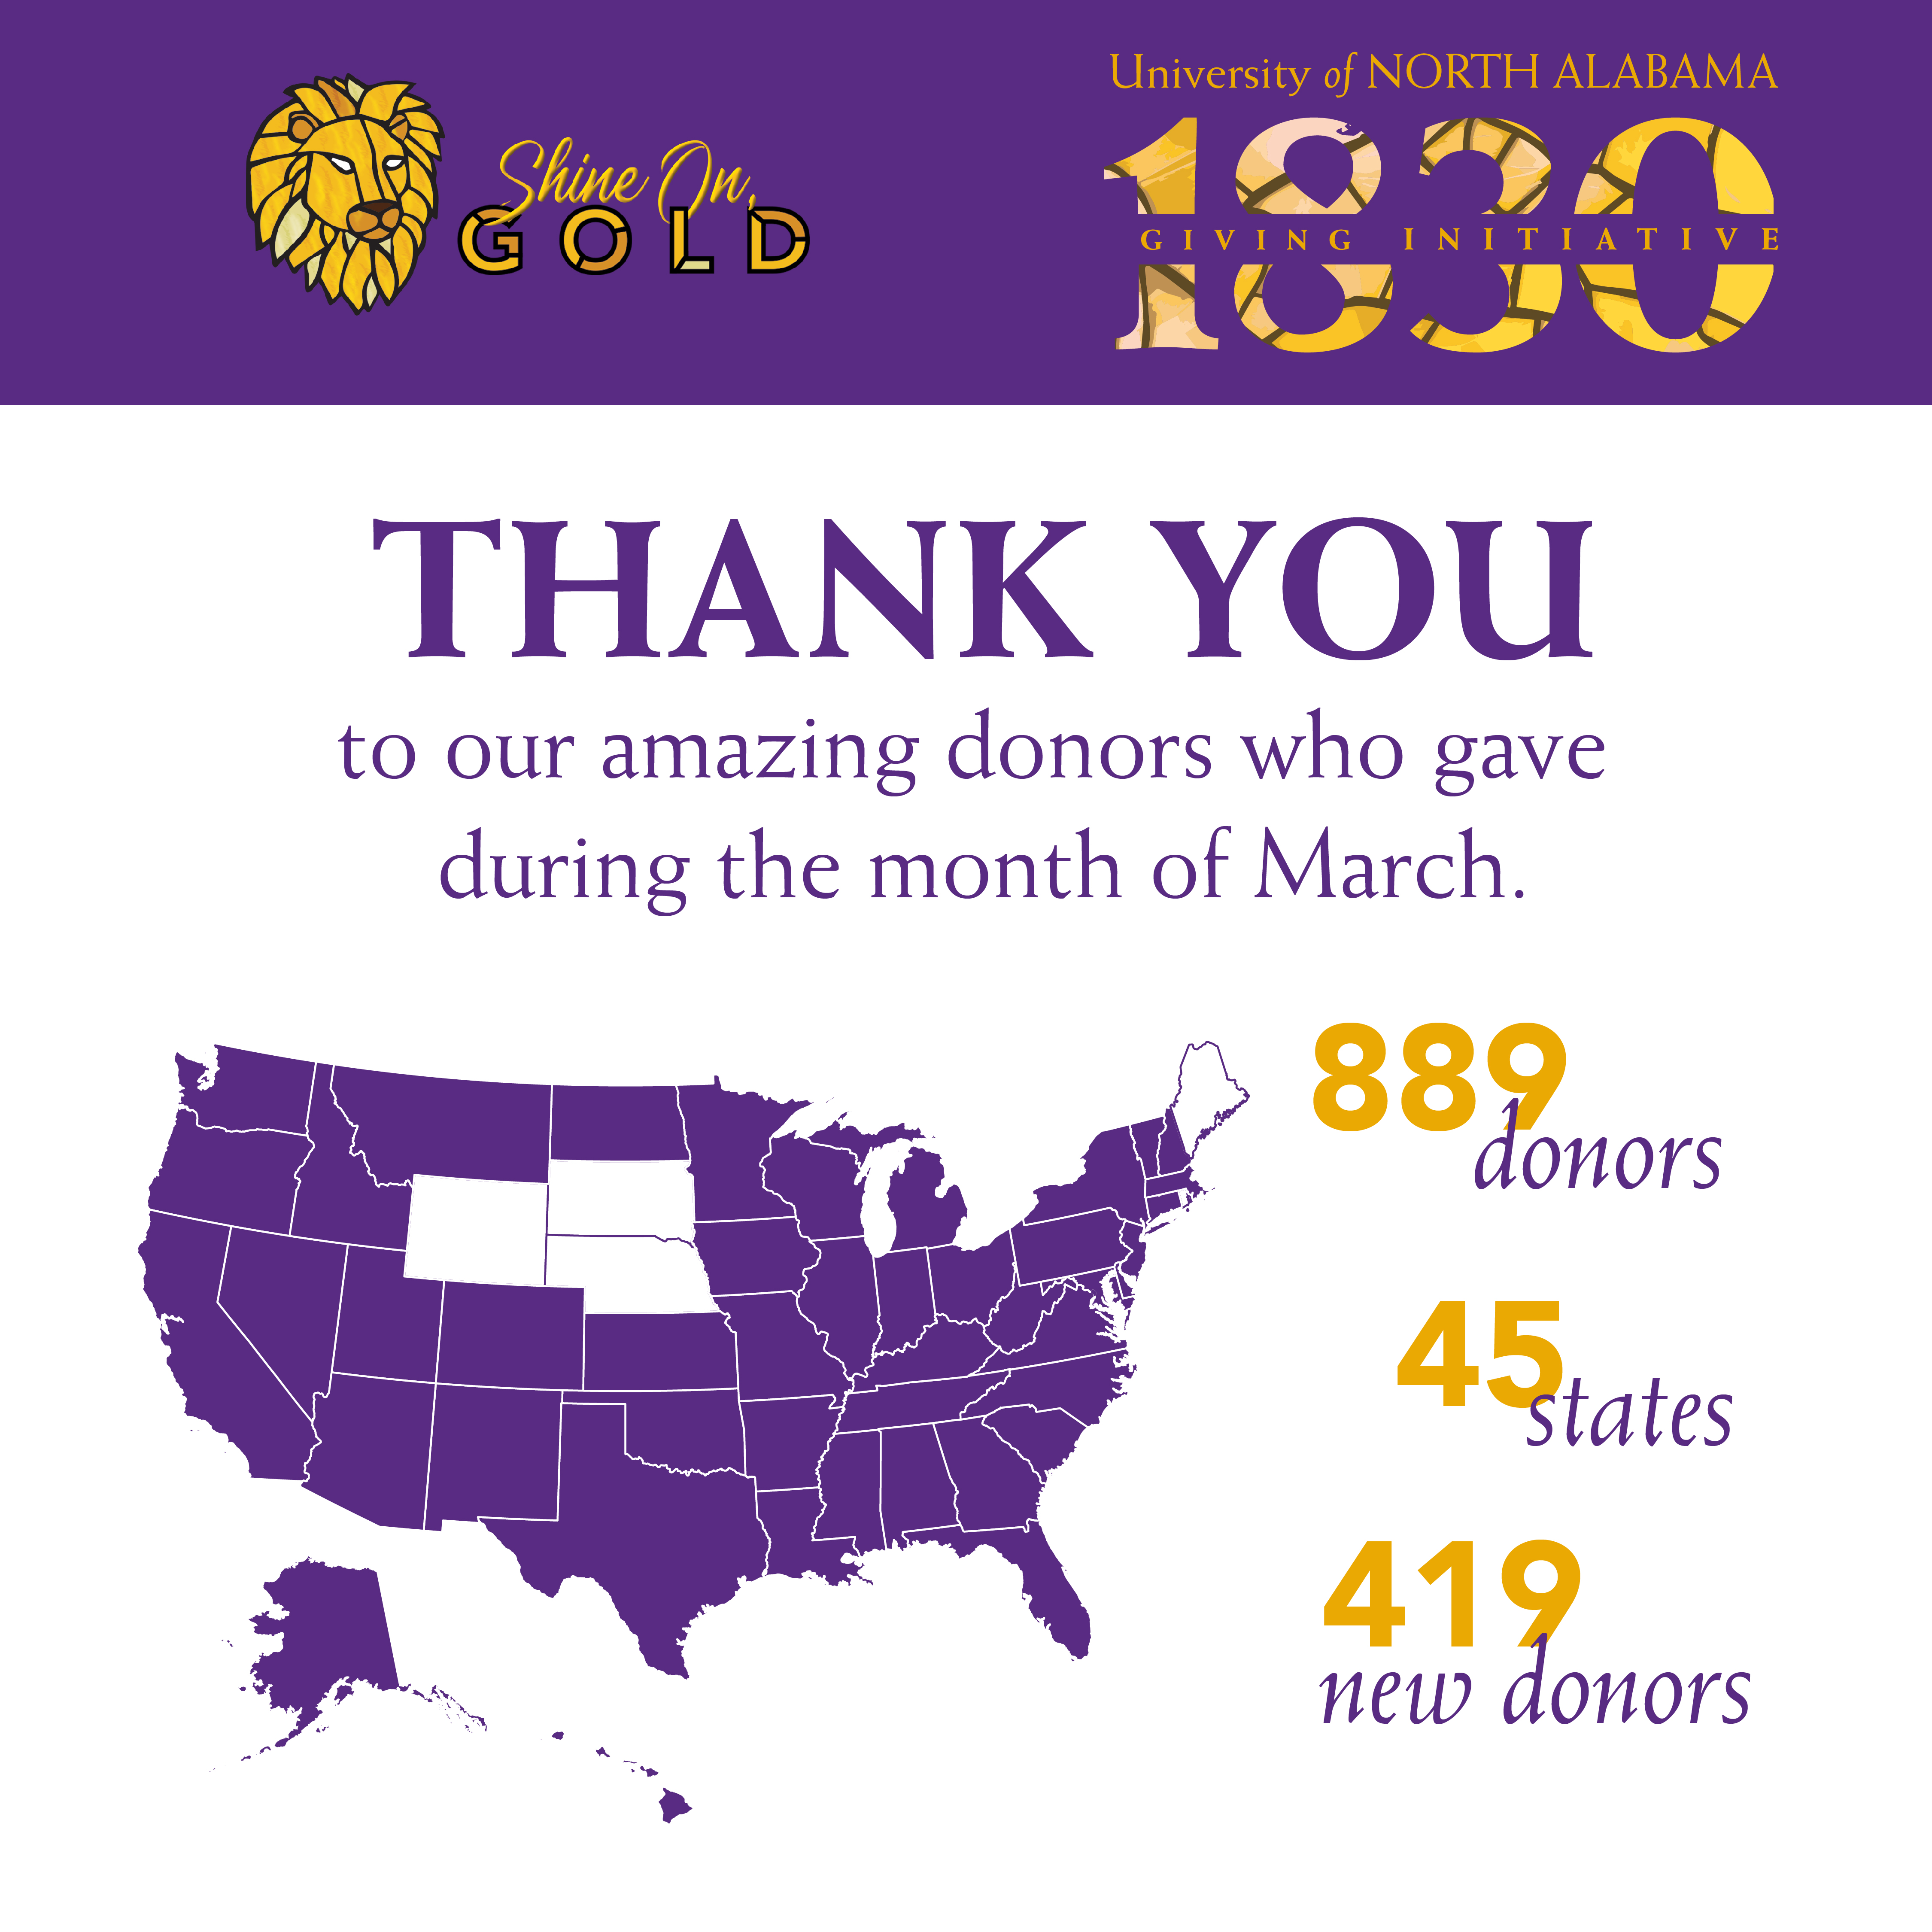 889 donors - 45 states - 419 new donors